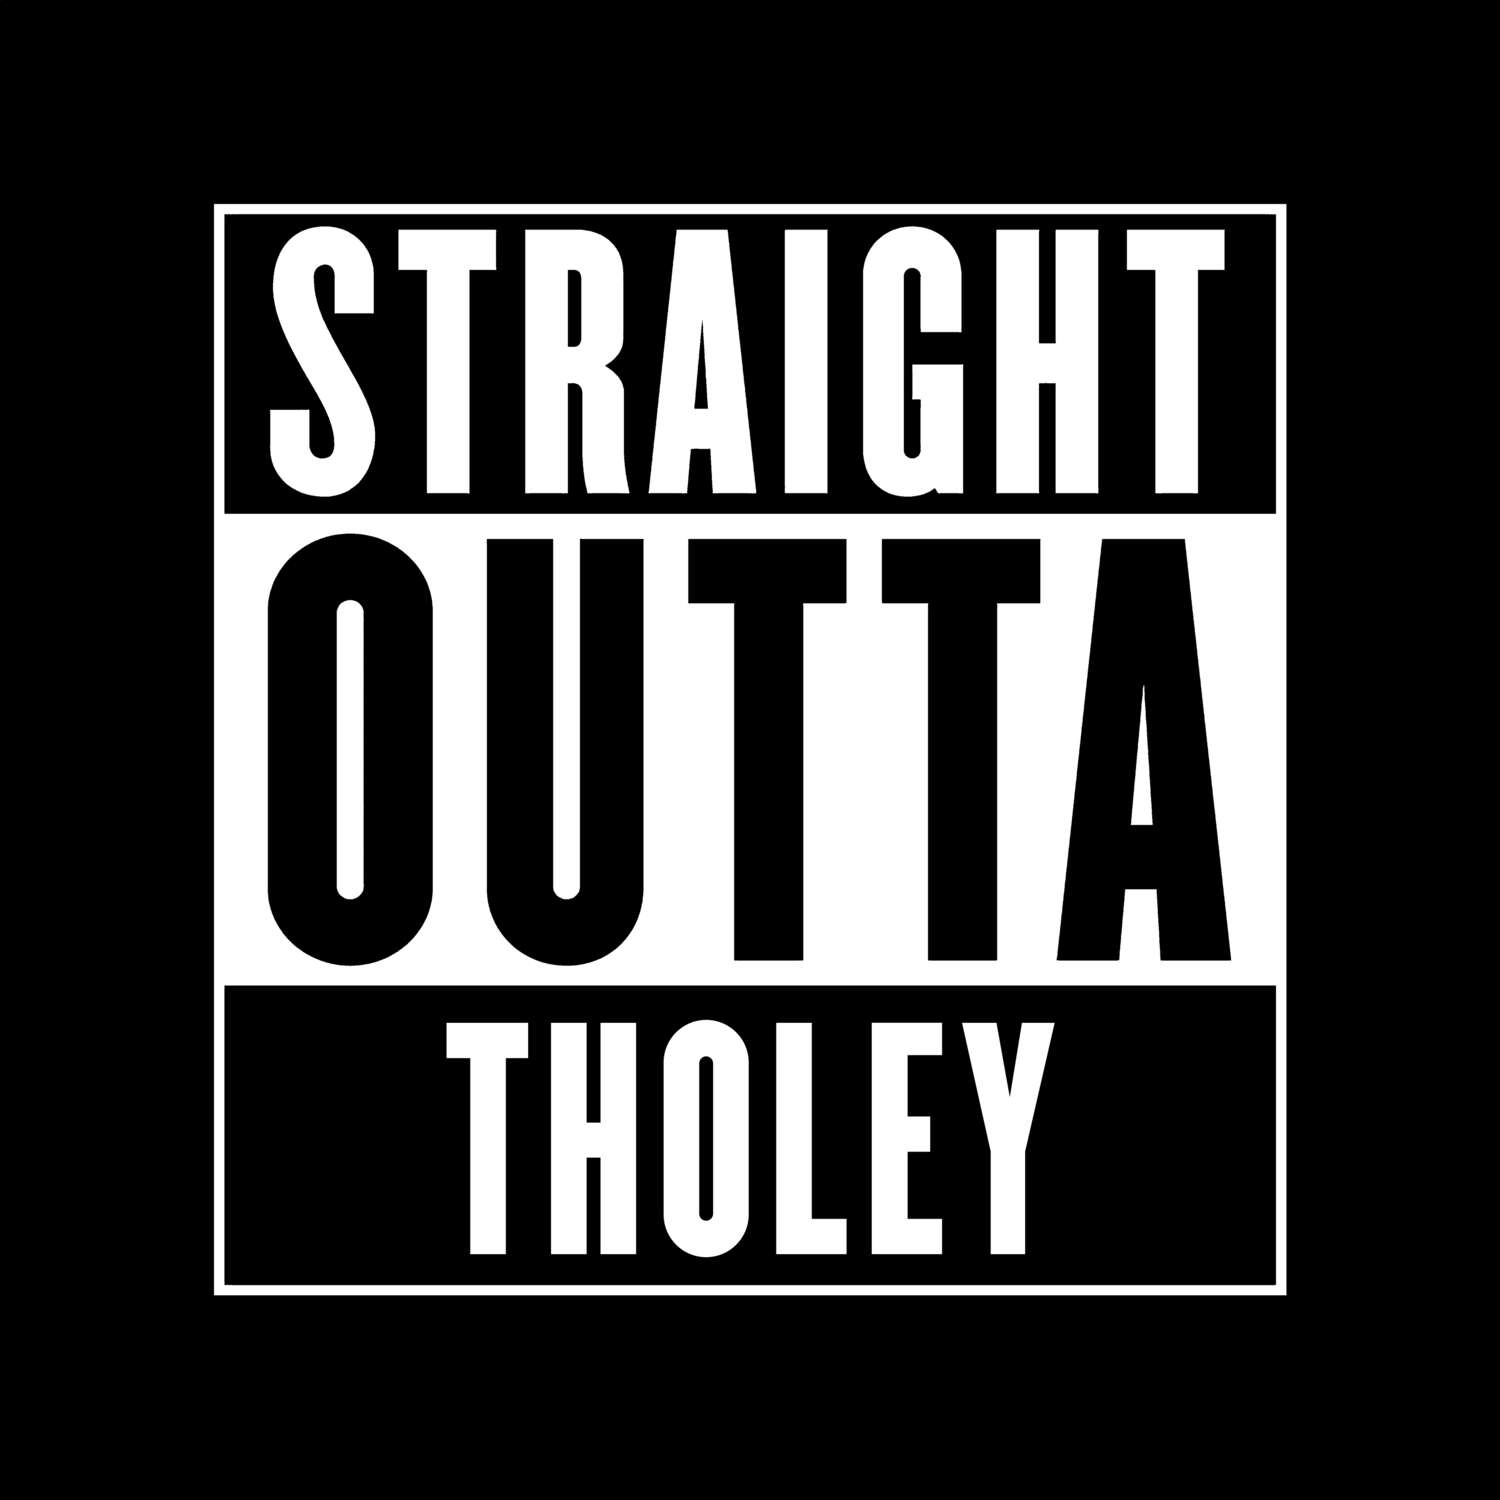 Tholey T-Shirt »Straight Outta«